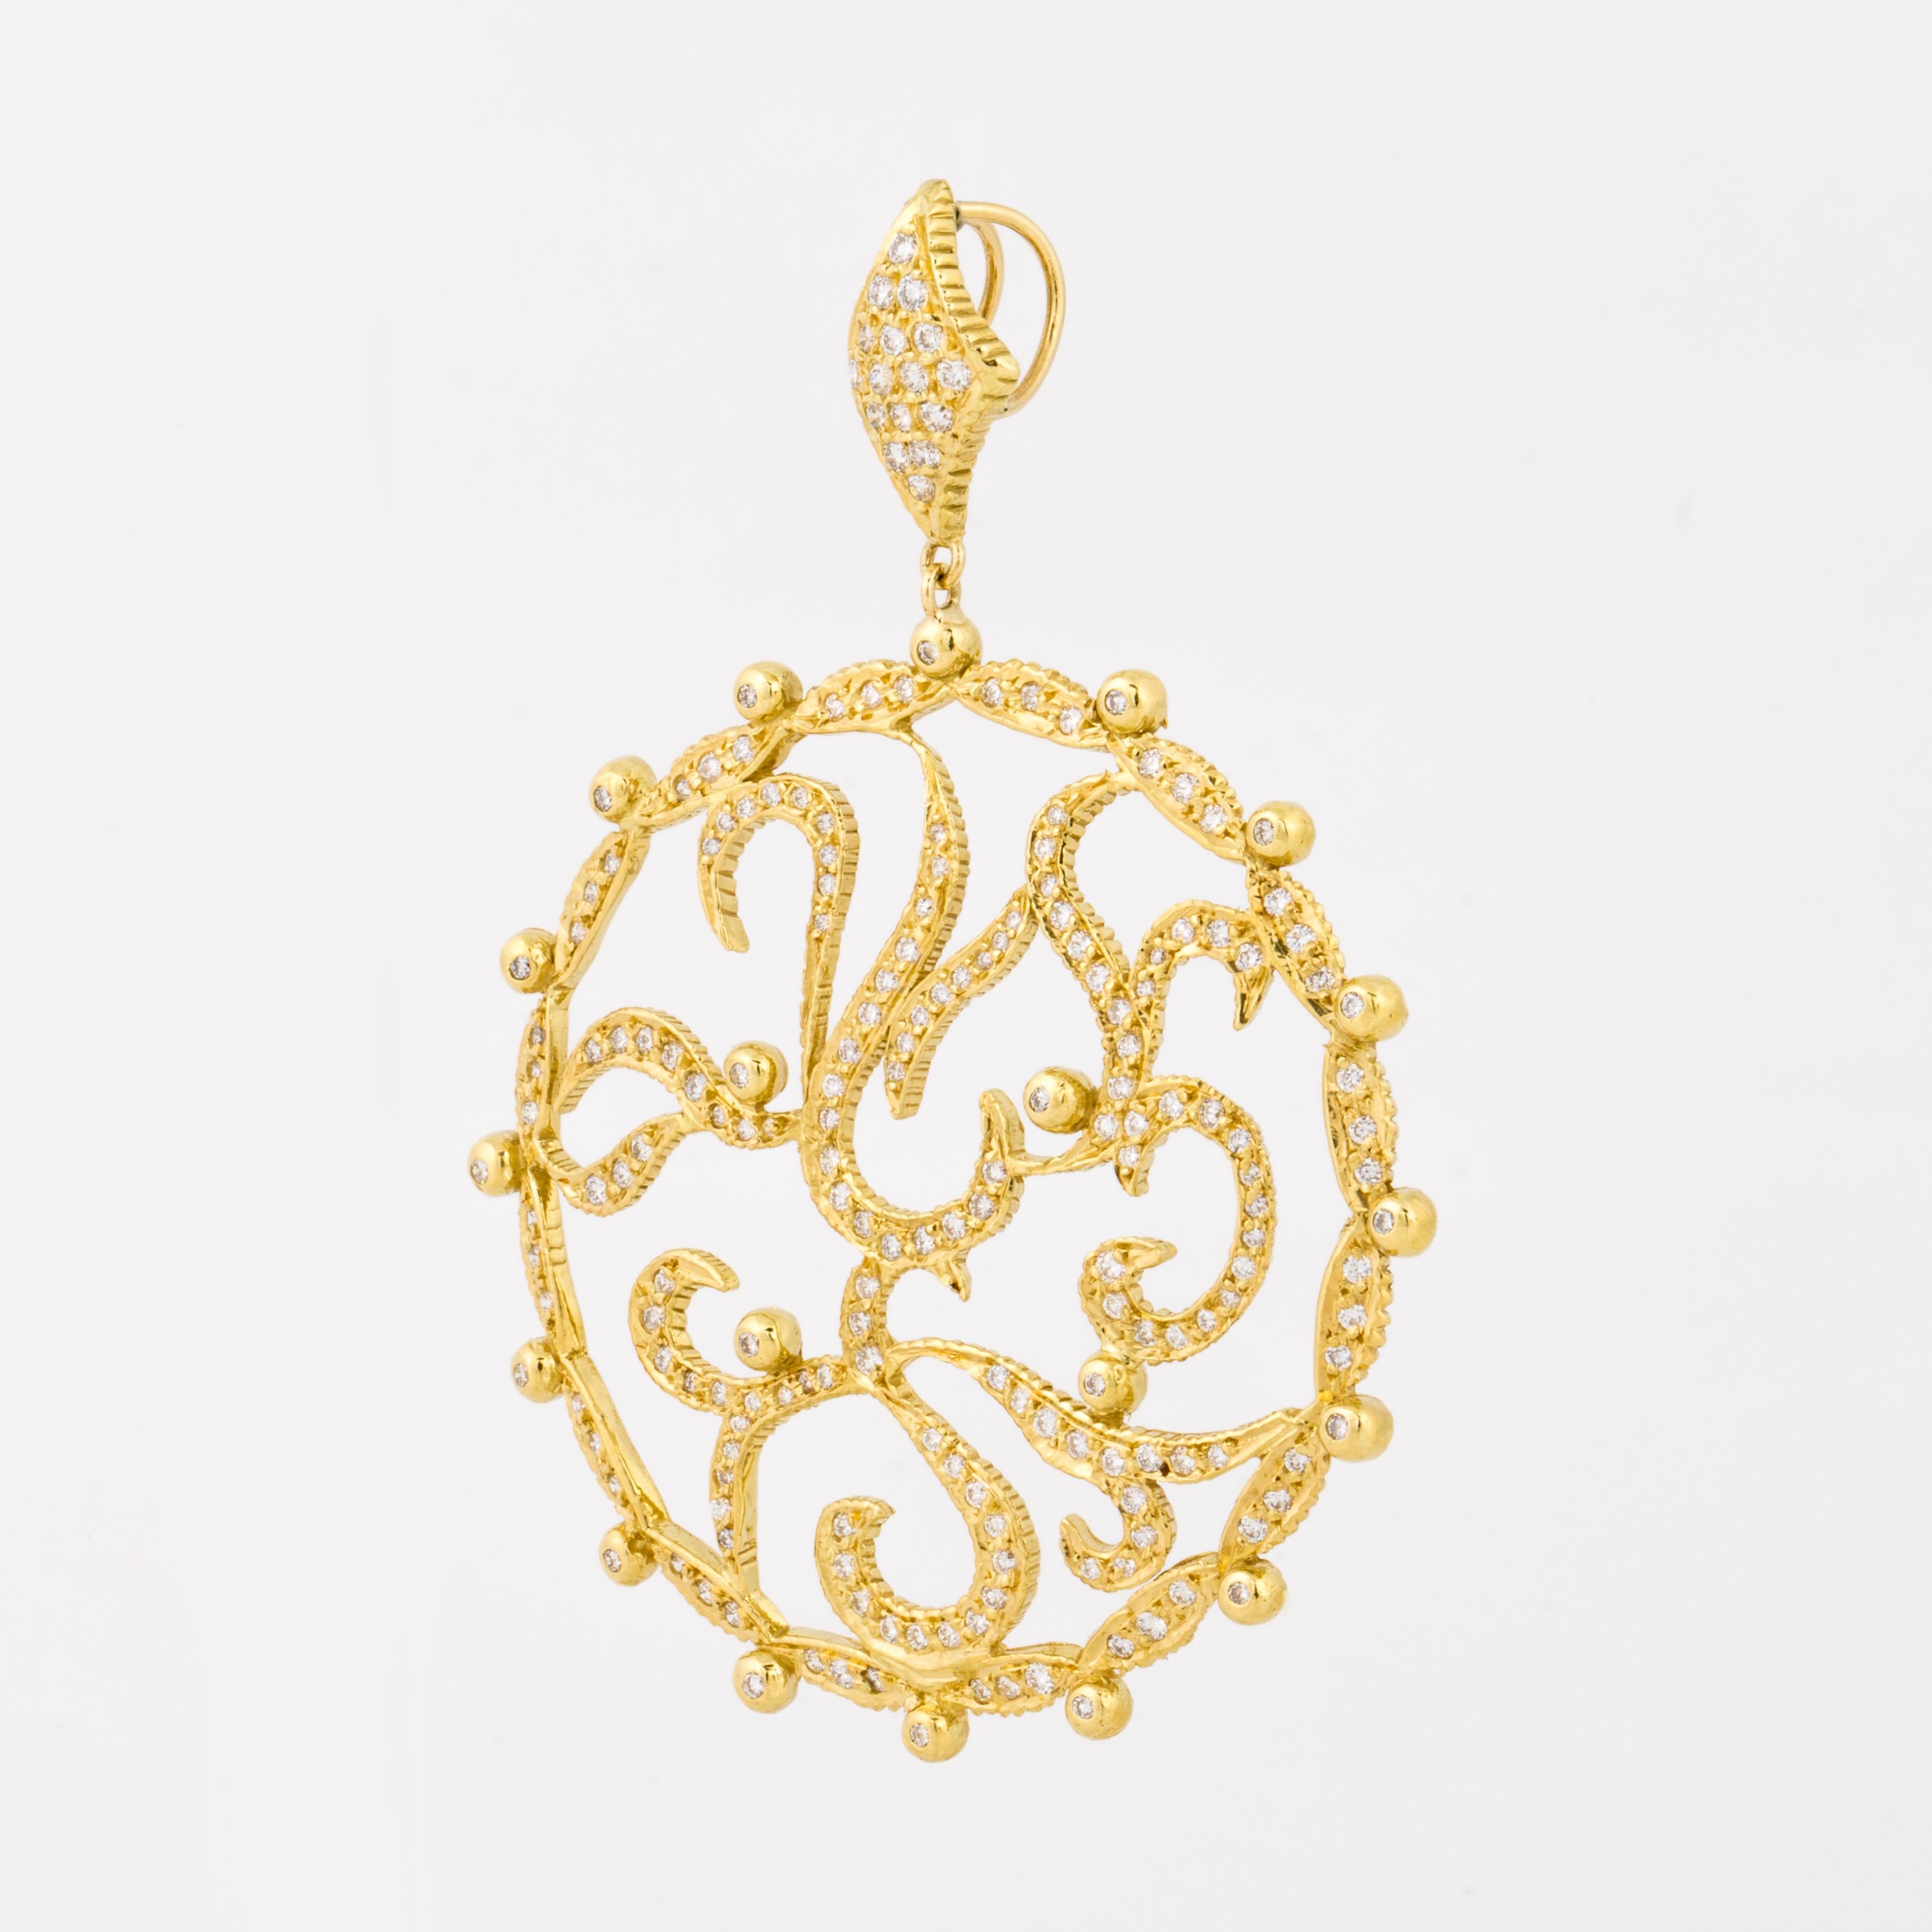 Doris Panos pendant in 18K yellow gold and diamonds.   It is an open circle free form design.  The front of the pendant is covered with 202 round diamonds  totaling 2.25 carats; G-H color and VS1-SI1 clarity.  It measures 2 3/4 inches long